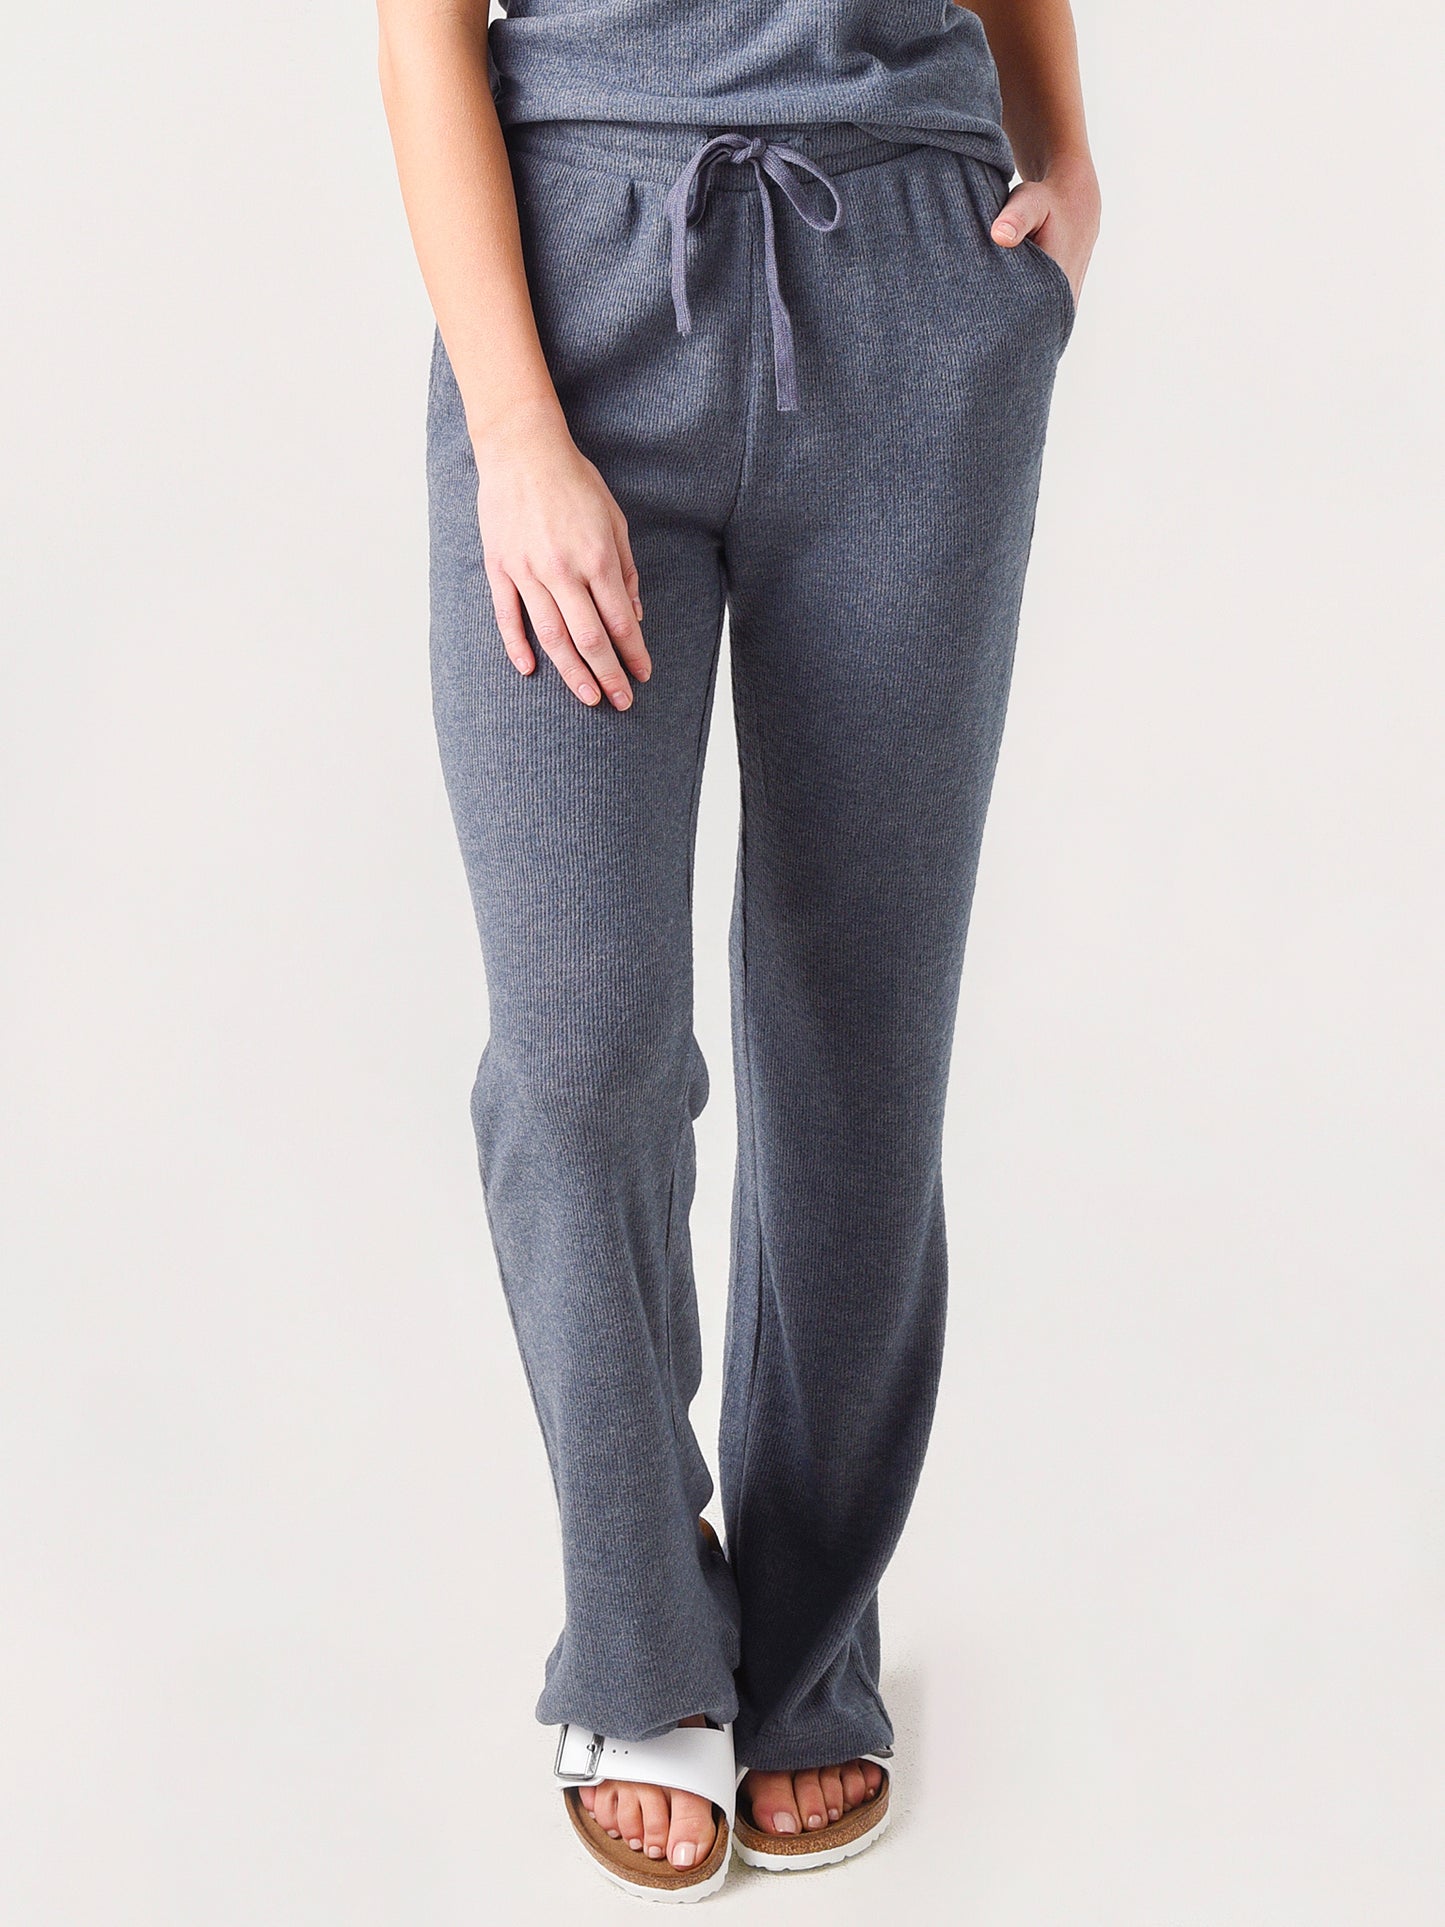 Z Supply Women's Go With The Flow Pant